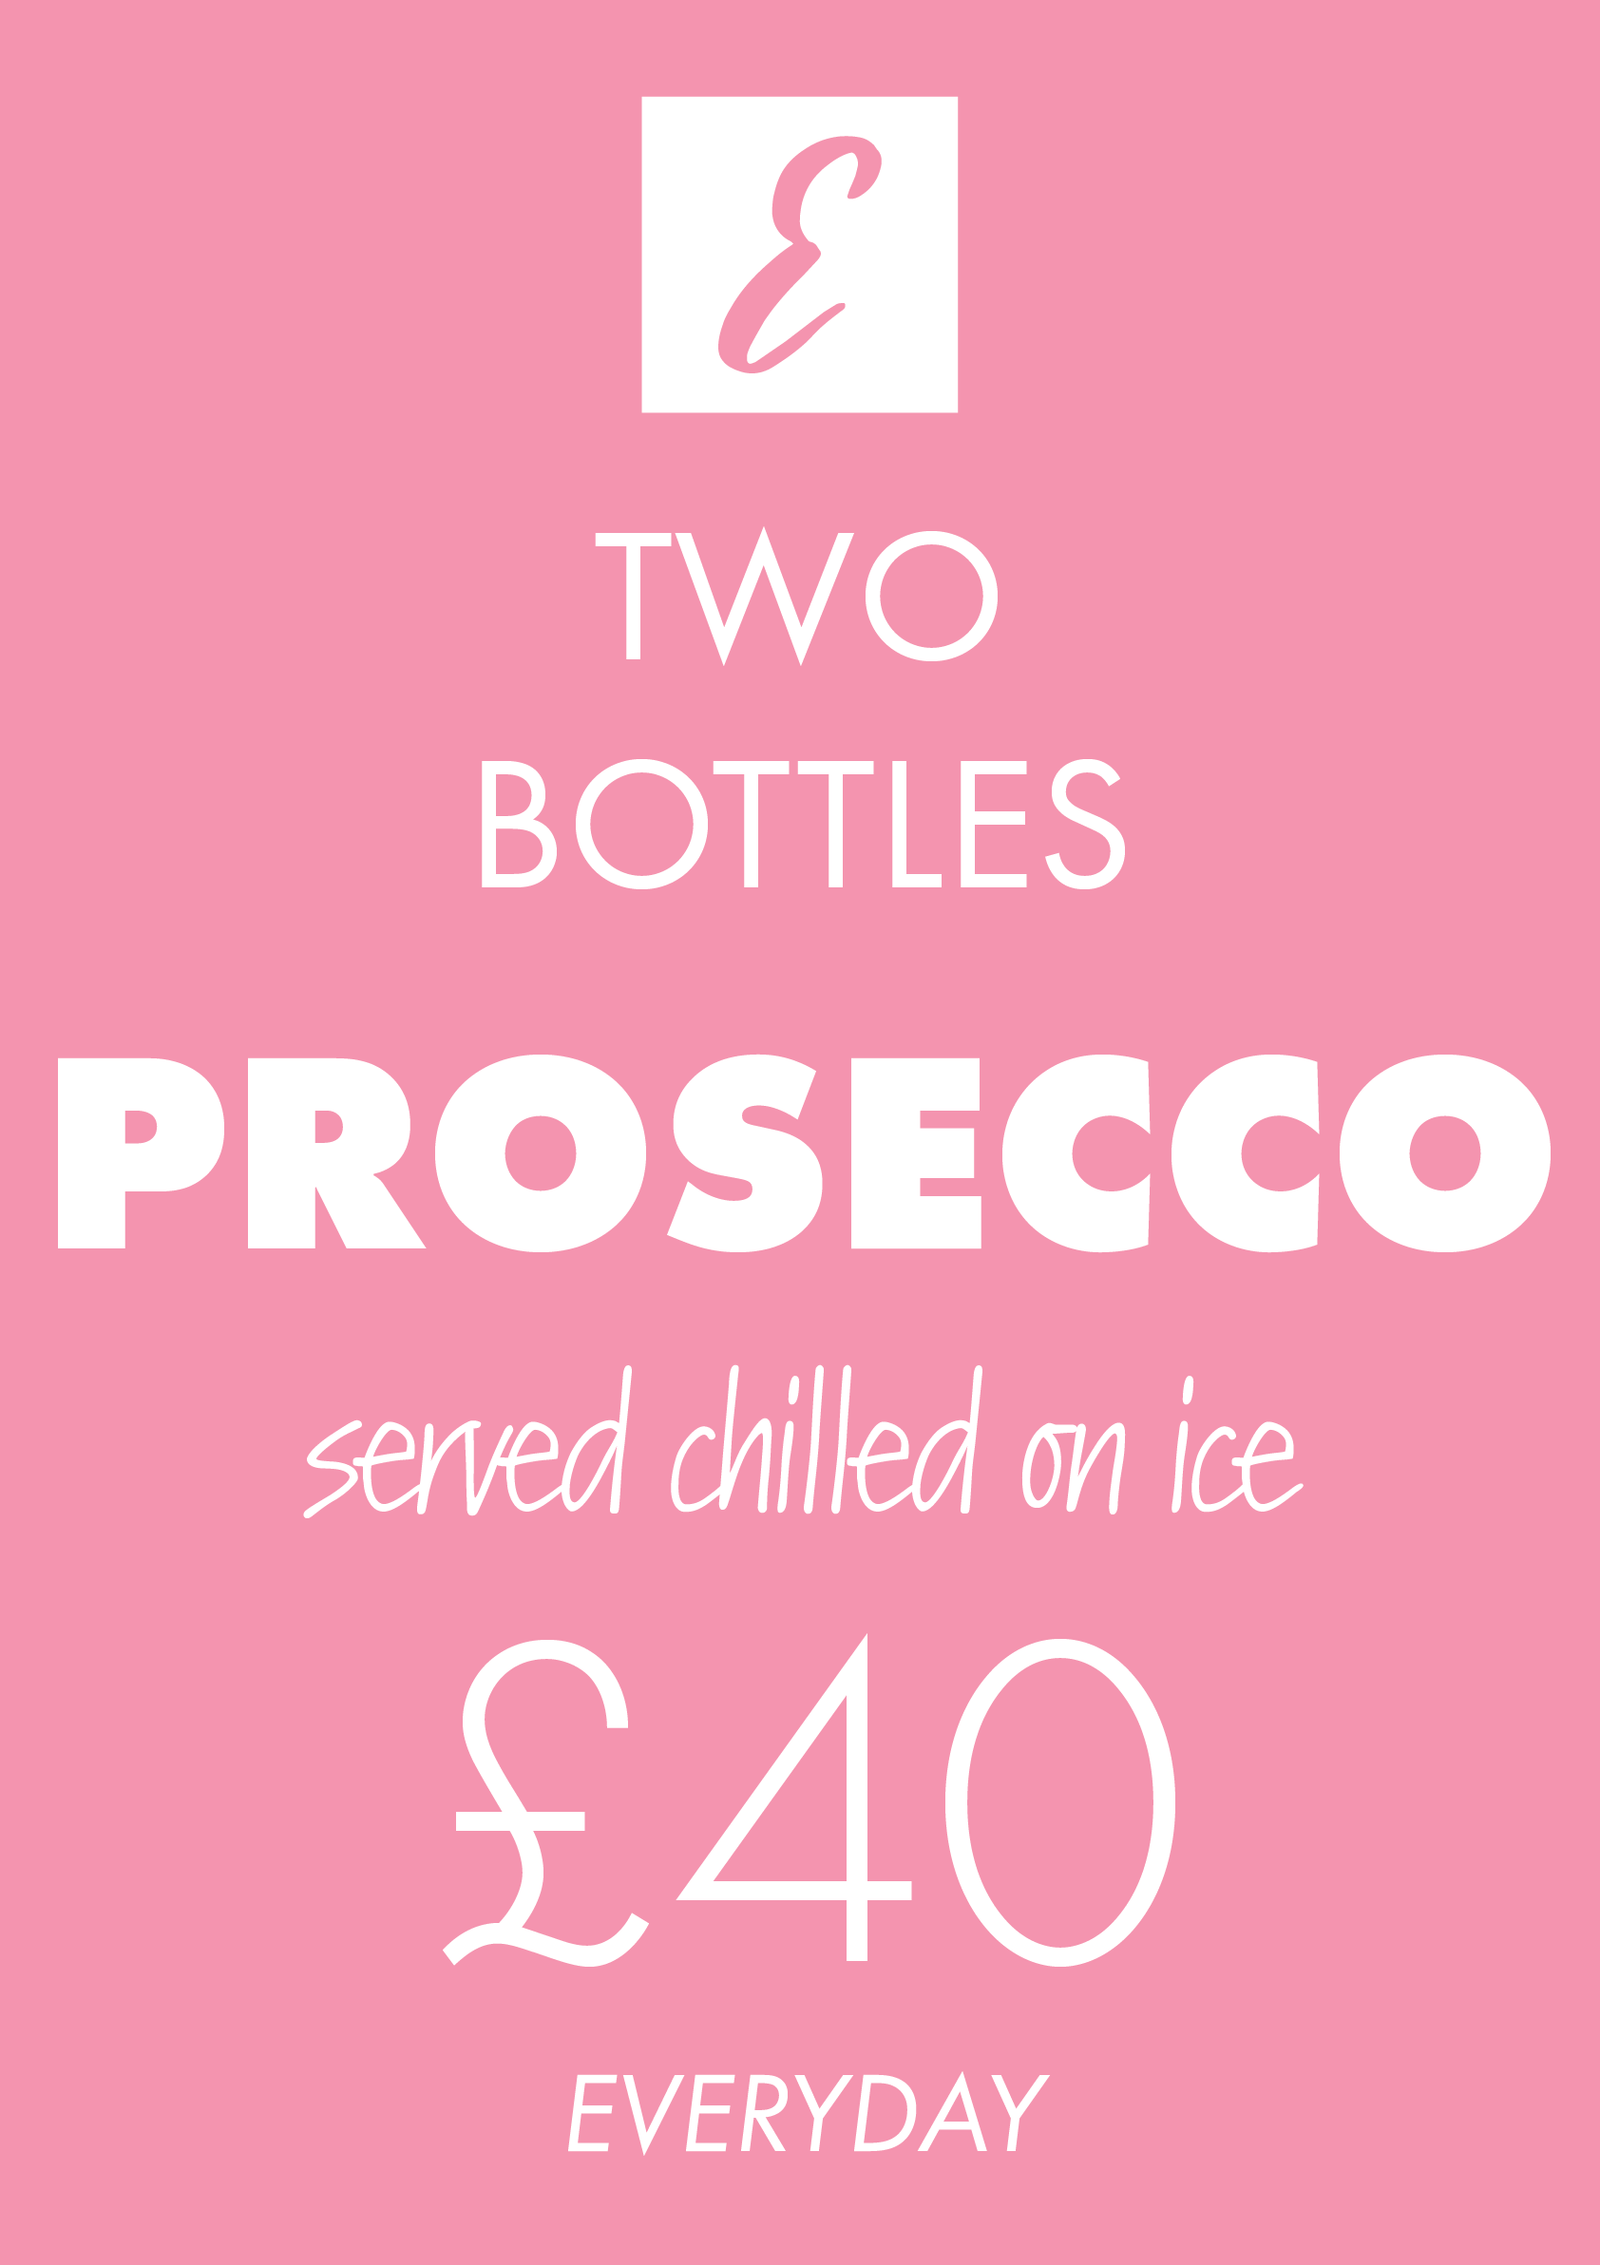 two bottles of Prosecco served chilled on ice £40 everyday